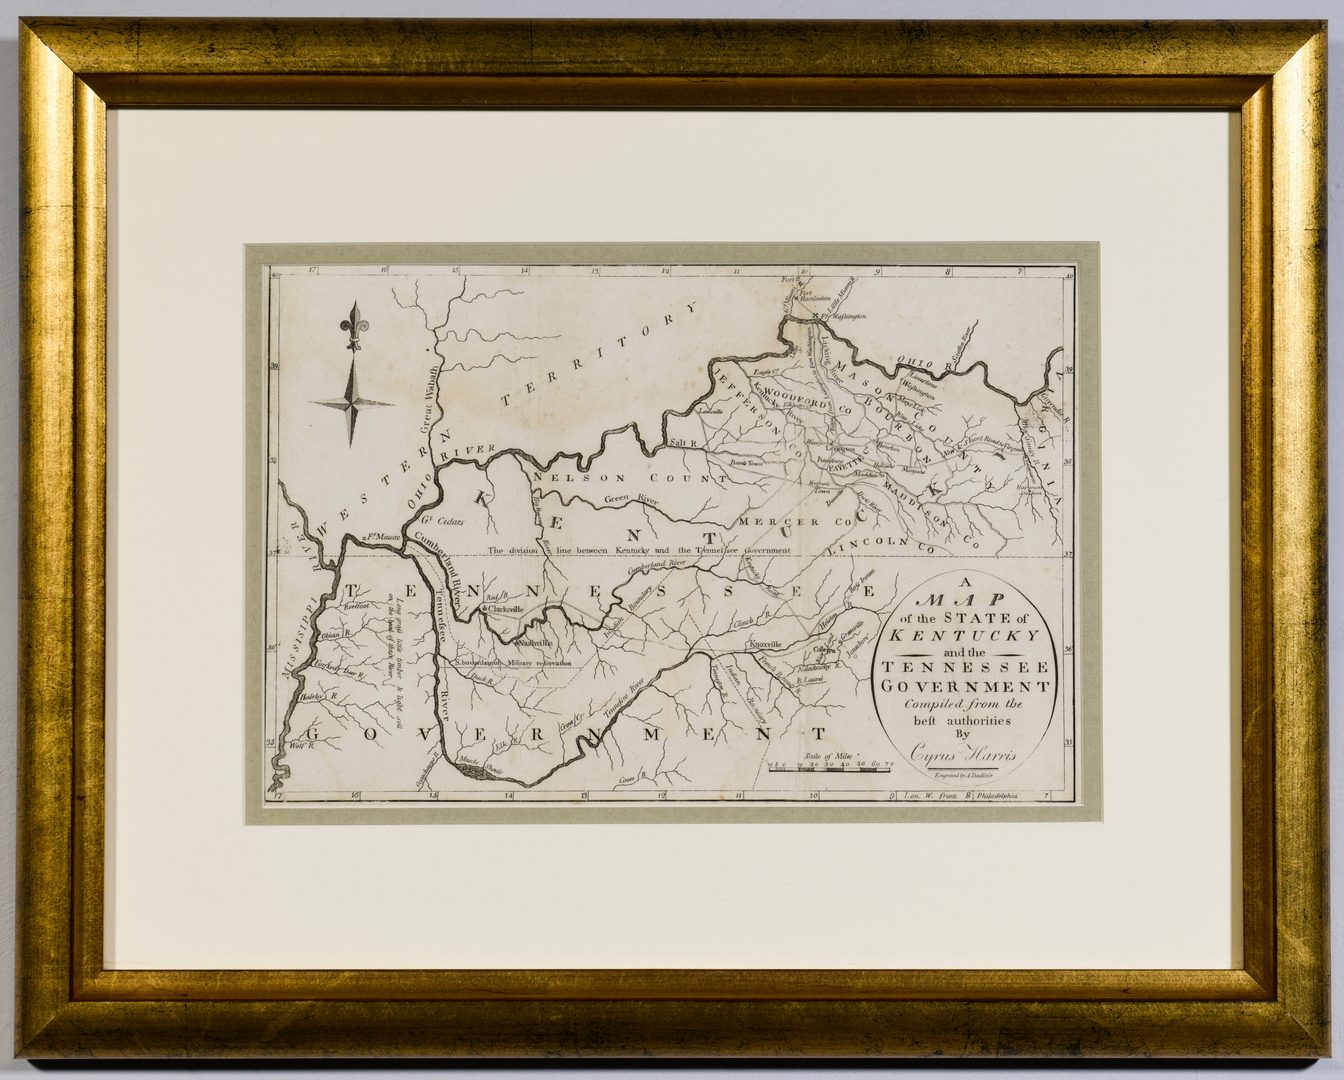 Lot 261: Kentucky and Tennessee Map, 1796 Harris